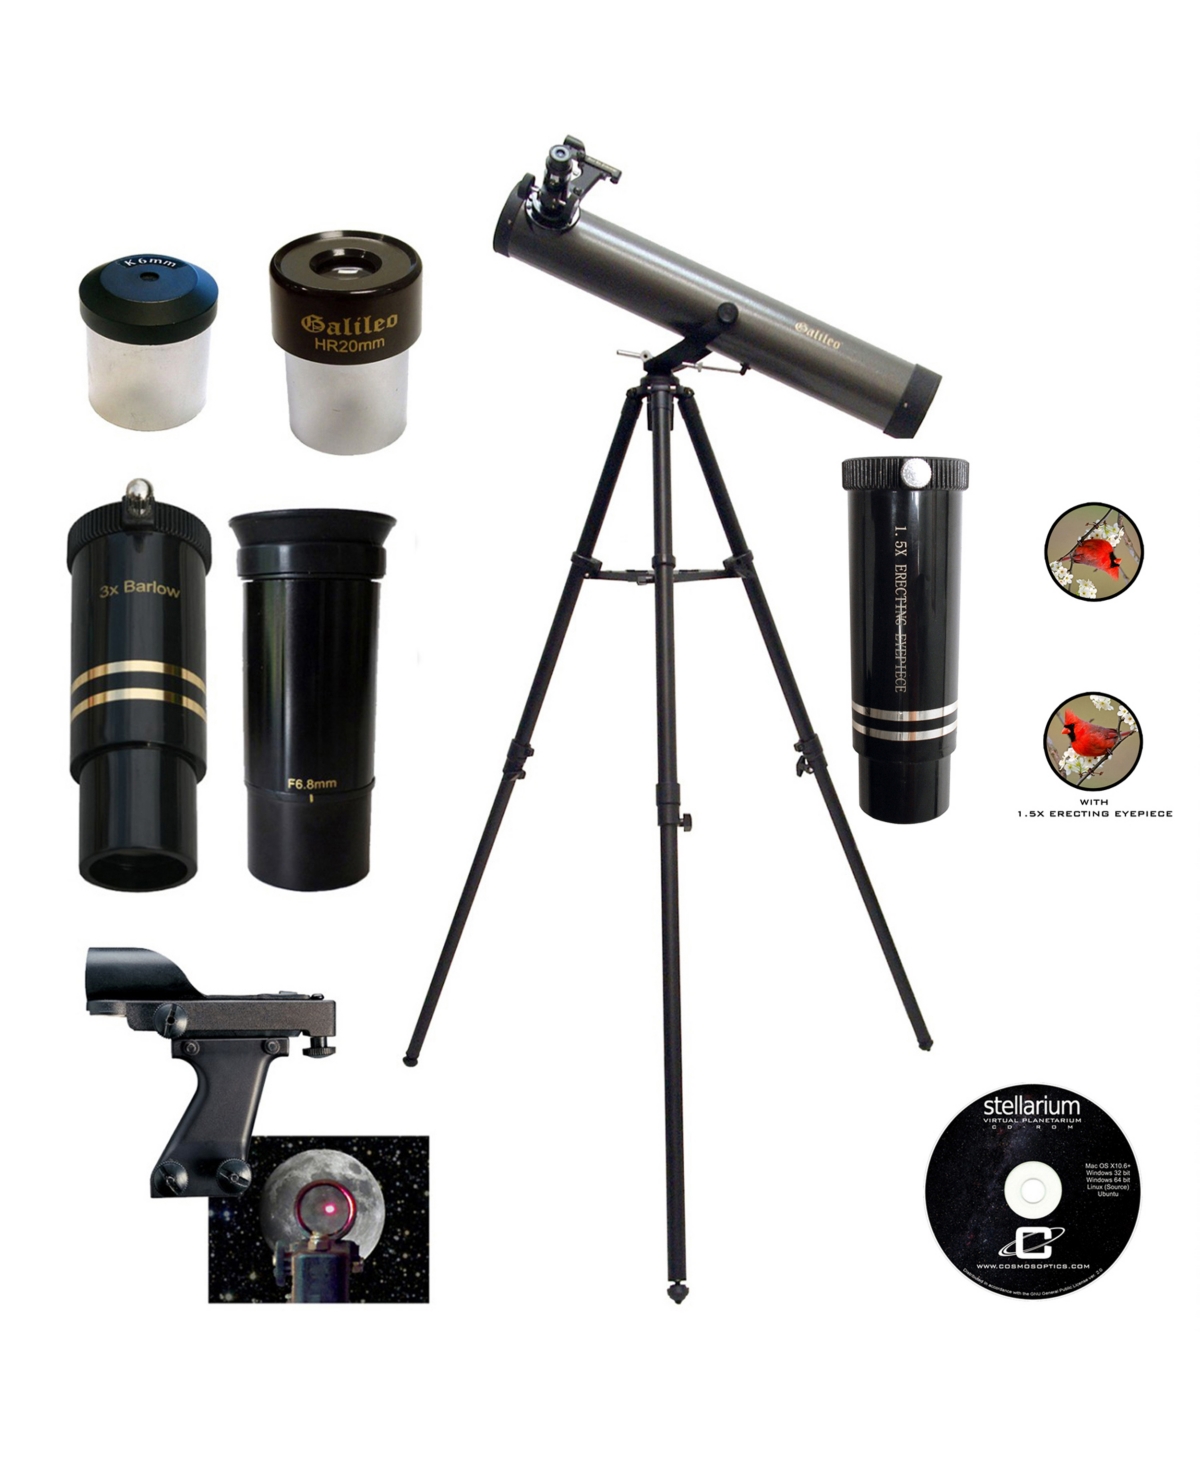 Cosmo Brands Galileo 800 X 80mm Astronomical Telescope And Zoom Eyepiece In Multi